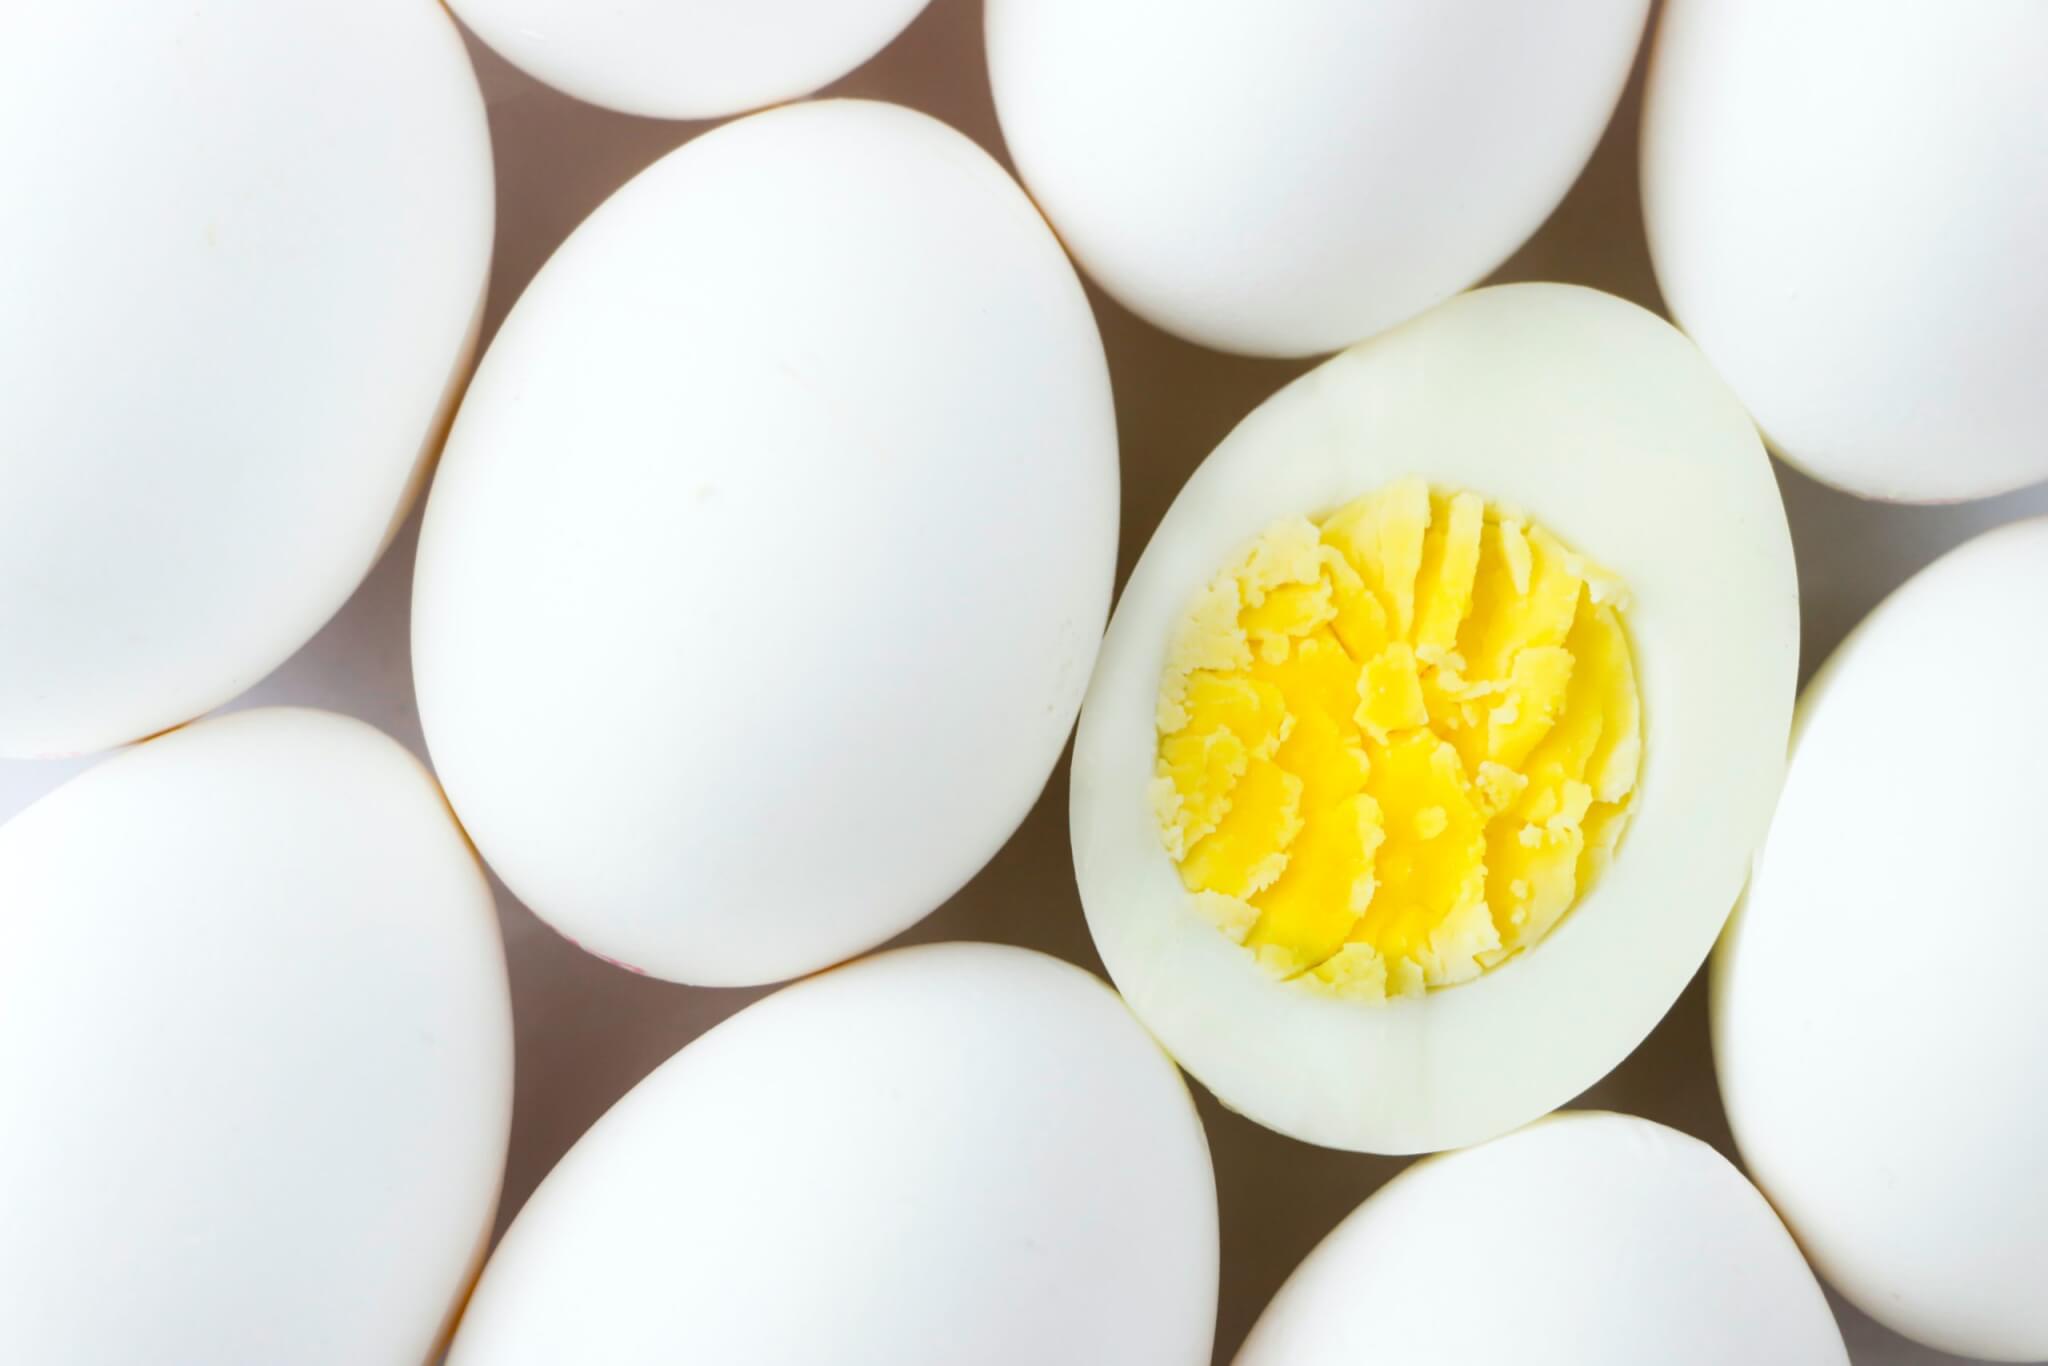 Hard-boiled eggs are tops on the list of best way to cook eggs, according to experts.